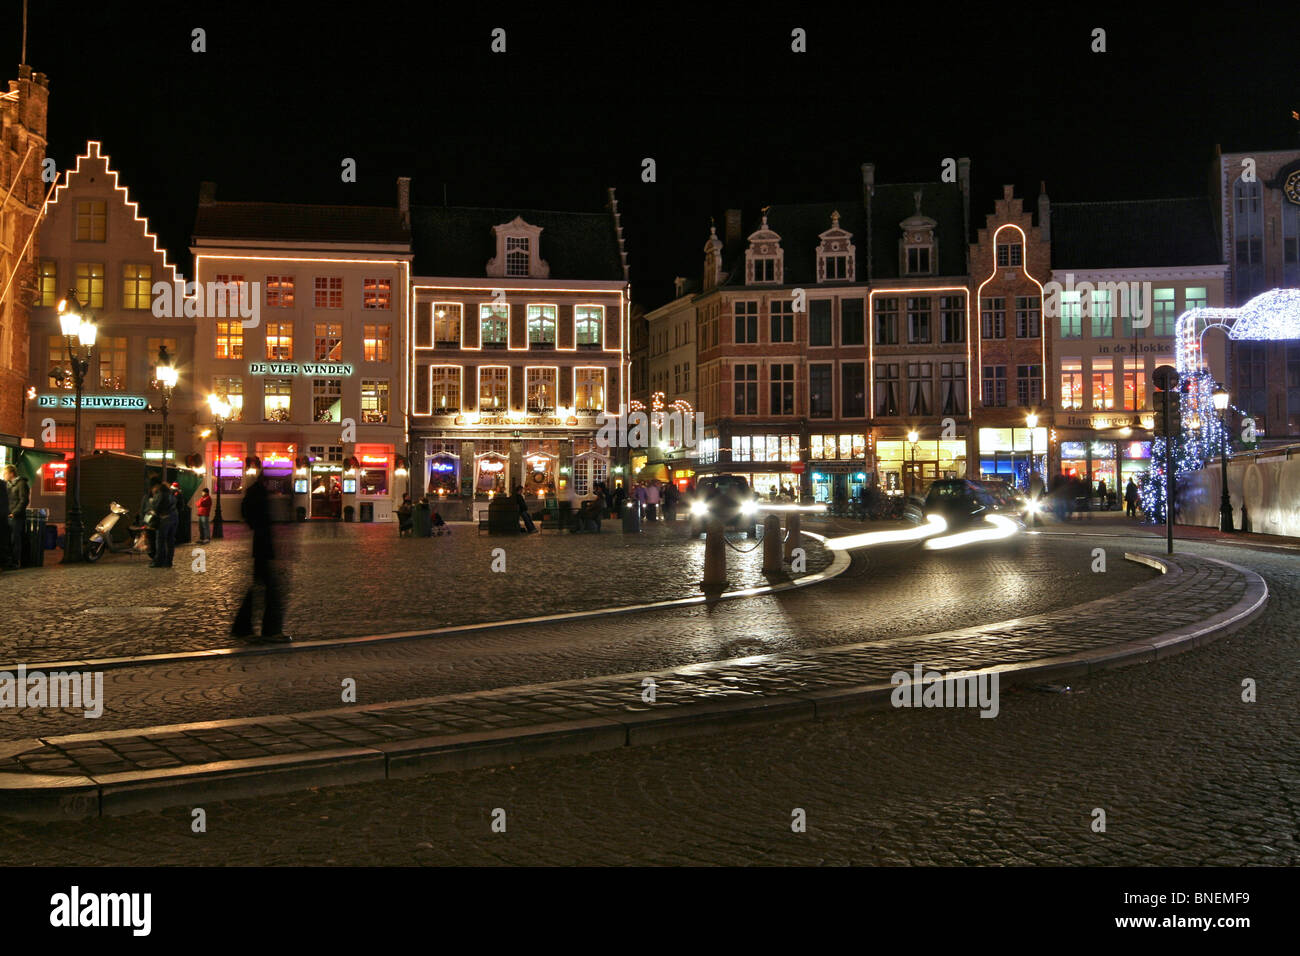 View of the Western side of the Markt at night with the cobbled street of Steenstraat in the foreground and passers-by Stock Photo